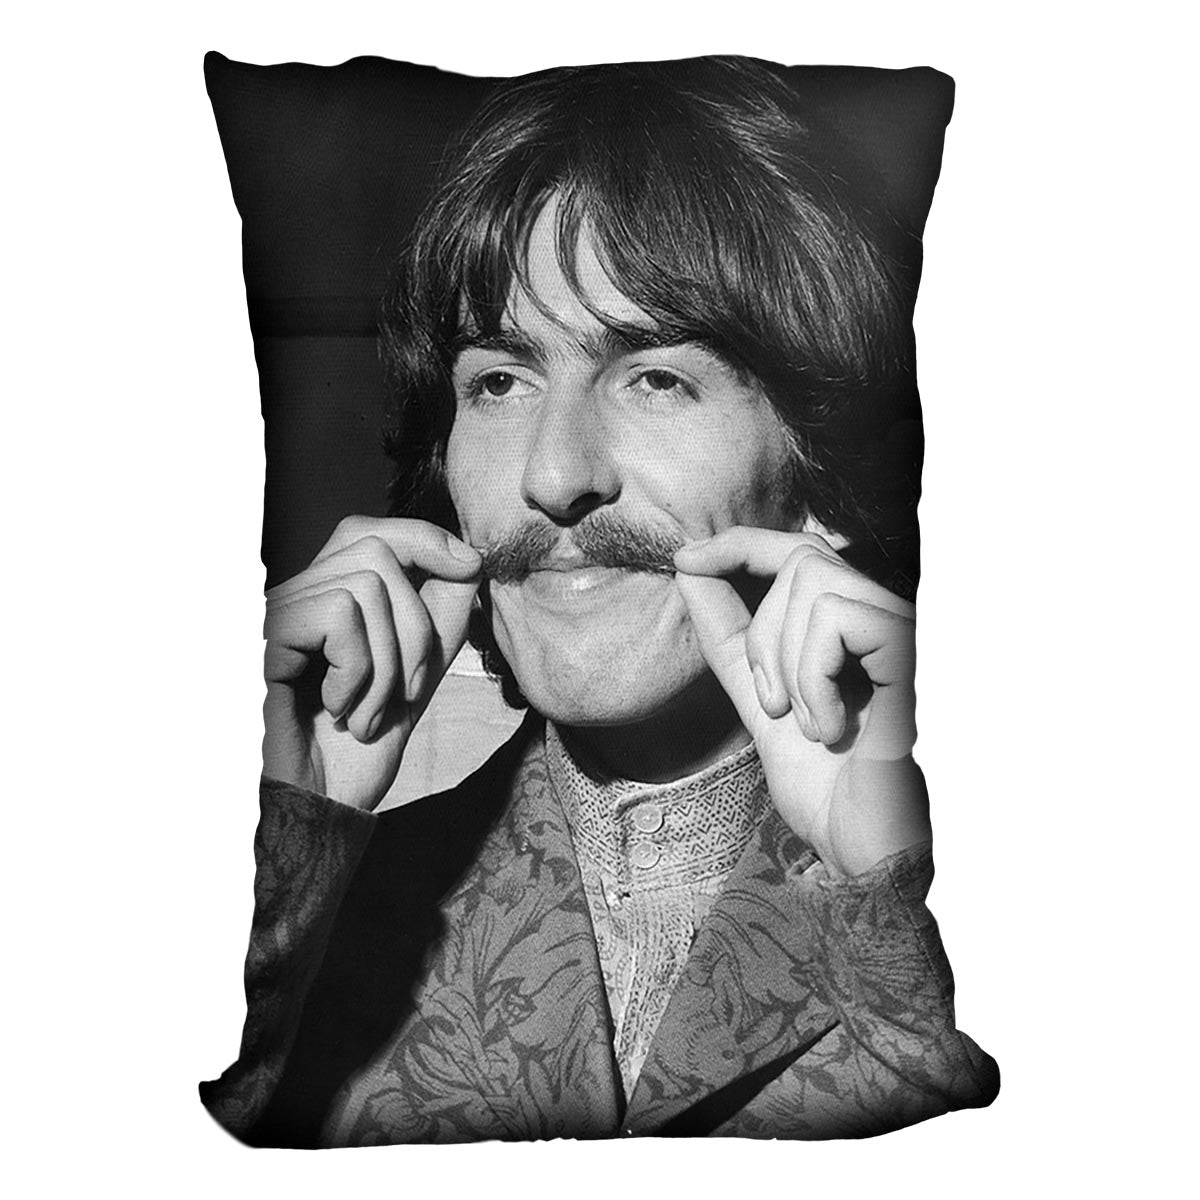 George Harrison plays with his moustache Cushion